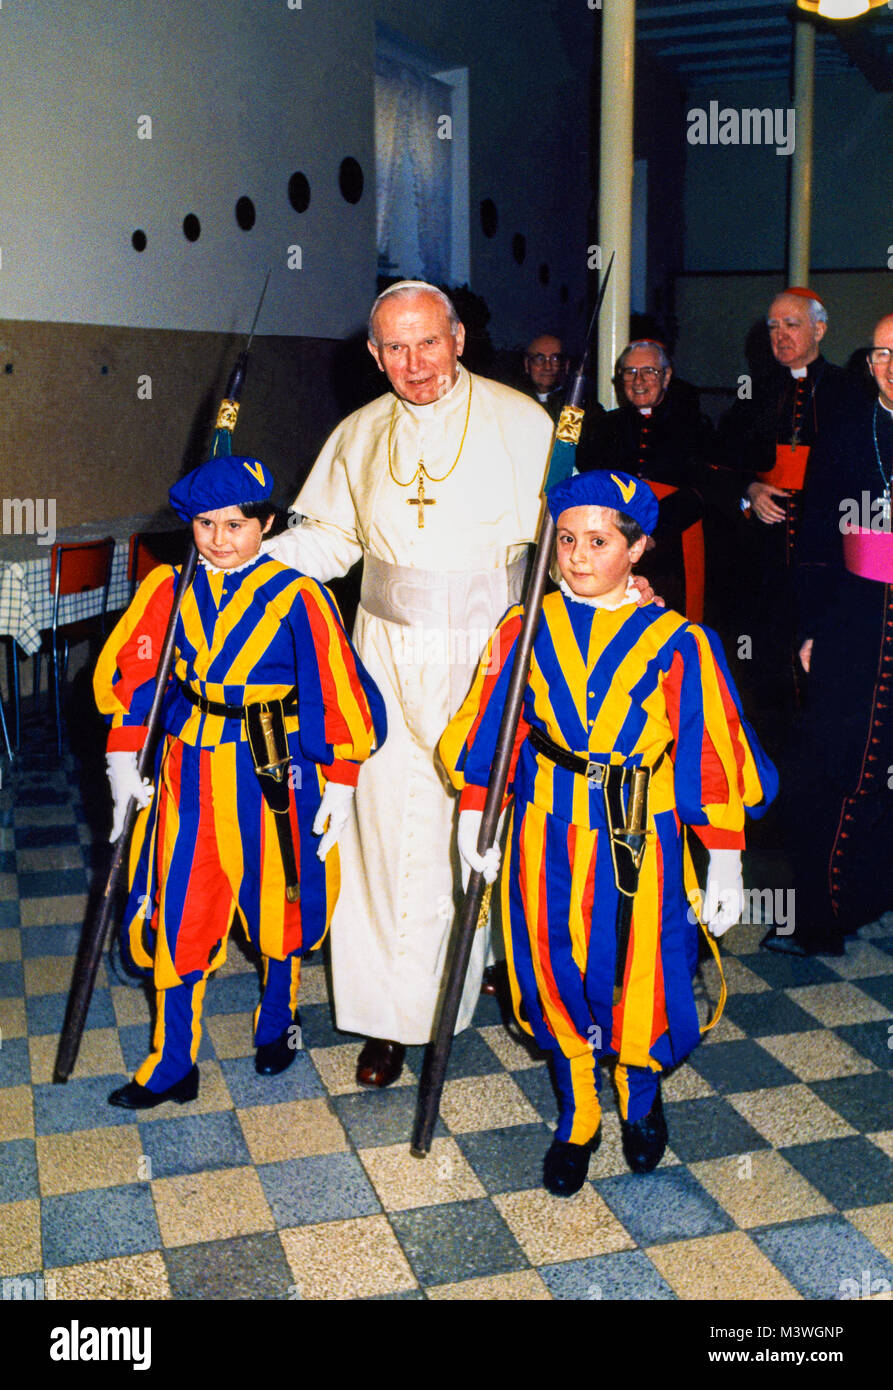 John II with Two children dressed as Swiss guards Photo - Alamy